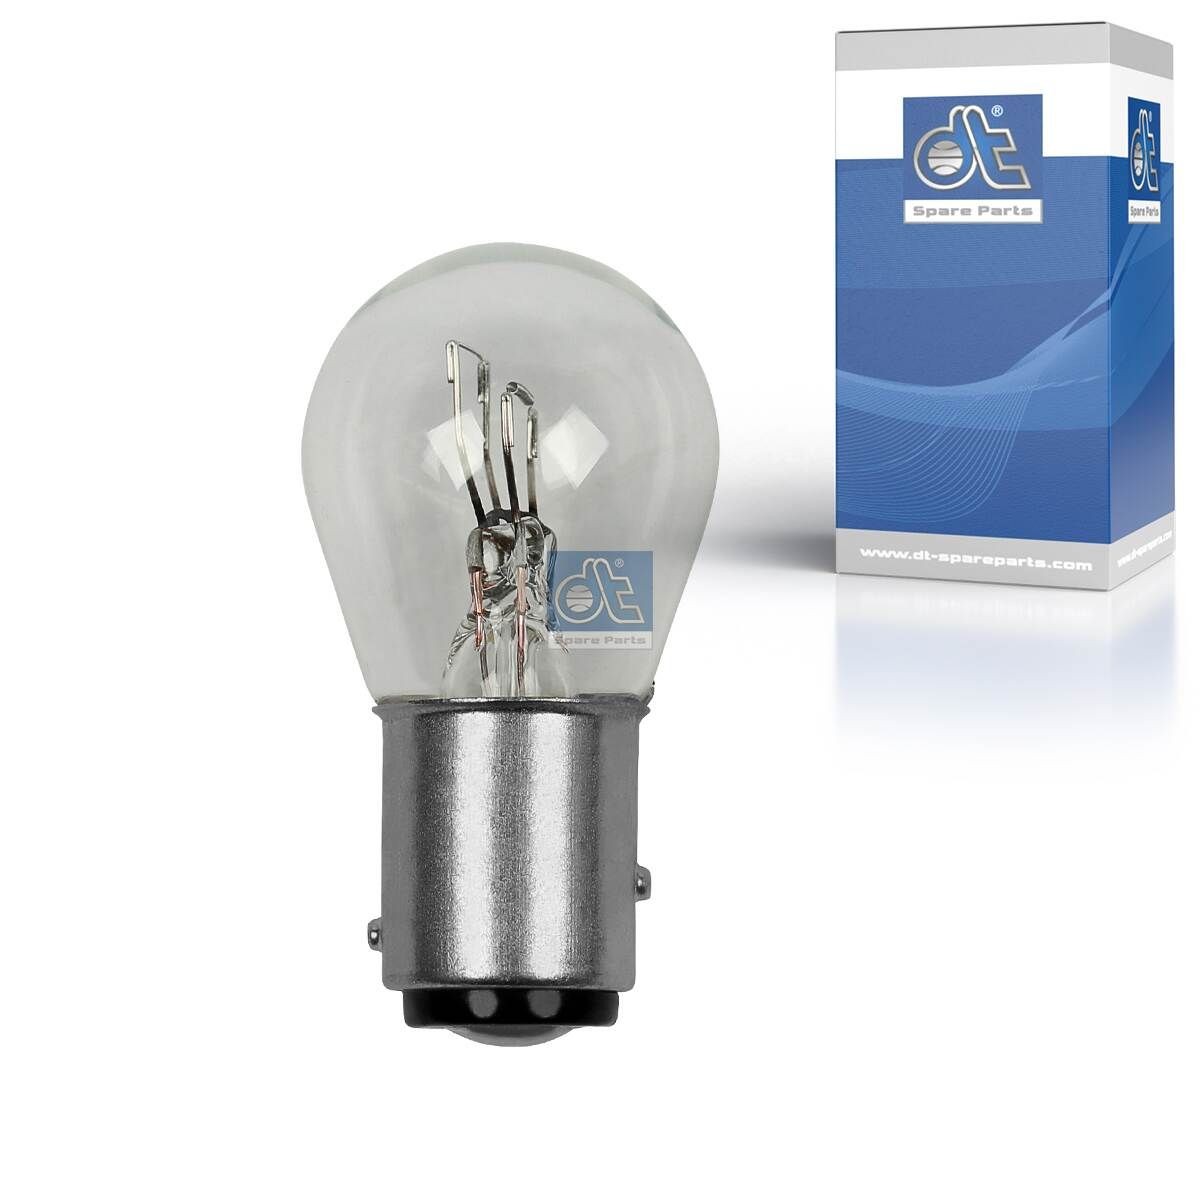 1 987 301 014 BOSCH K 15772 Bulb 12V 10W ▷ AUTODOC price and review